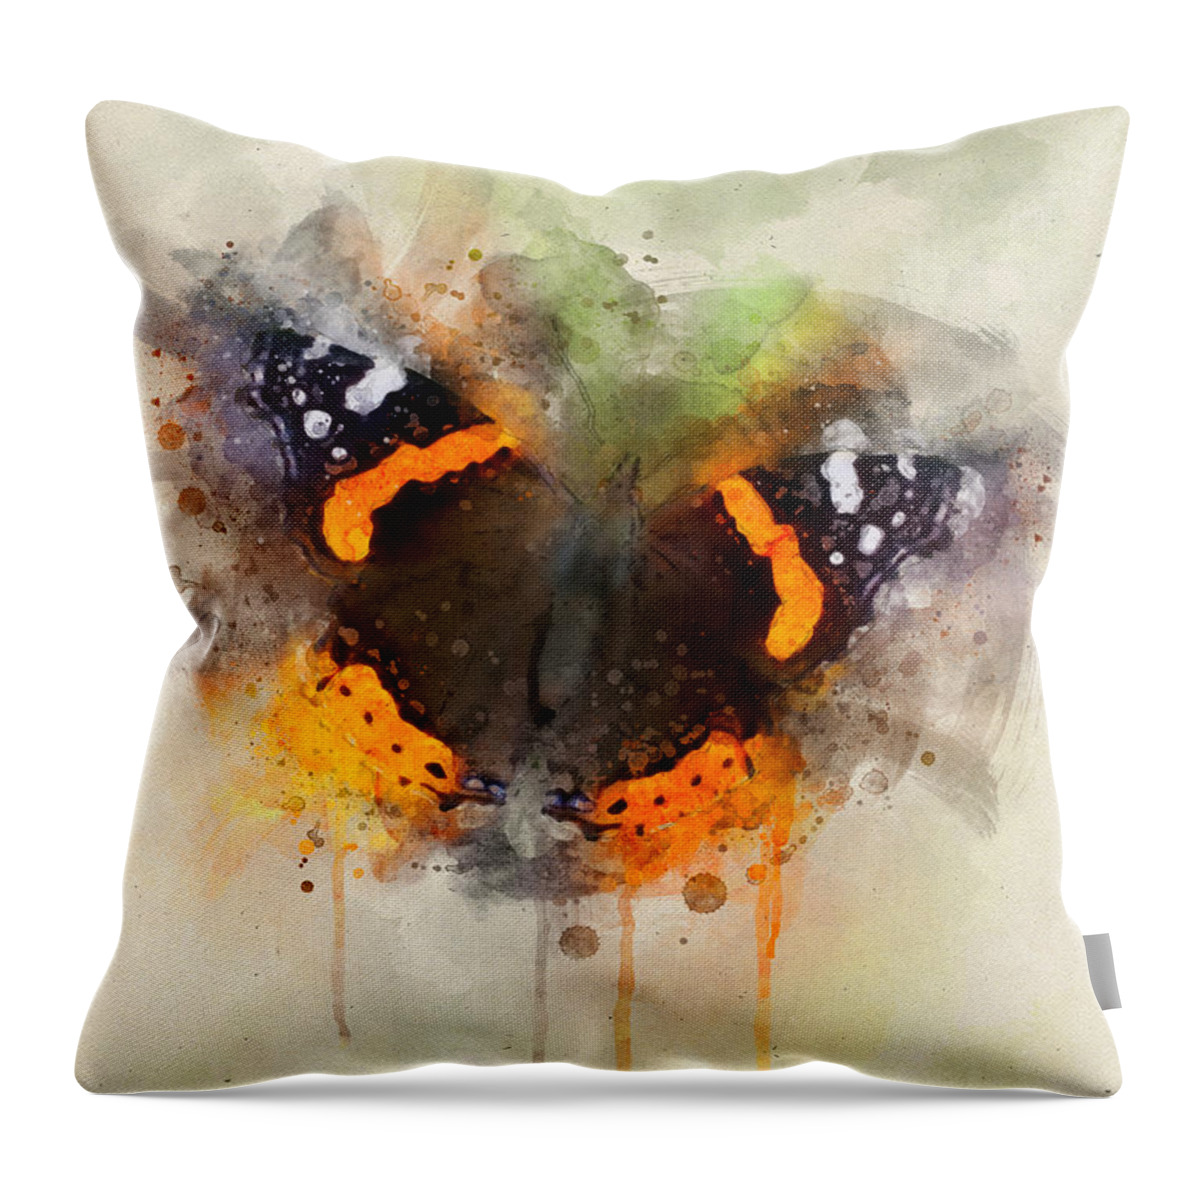 Butterfly Throw Pillow featuring the digital art The Admiral by Geir Rosset